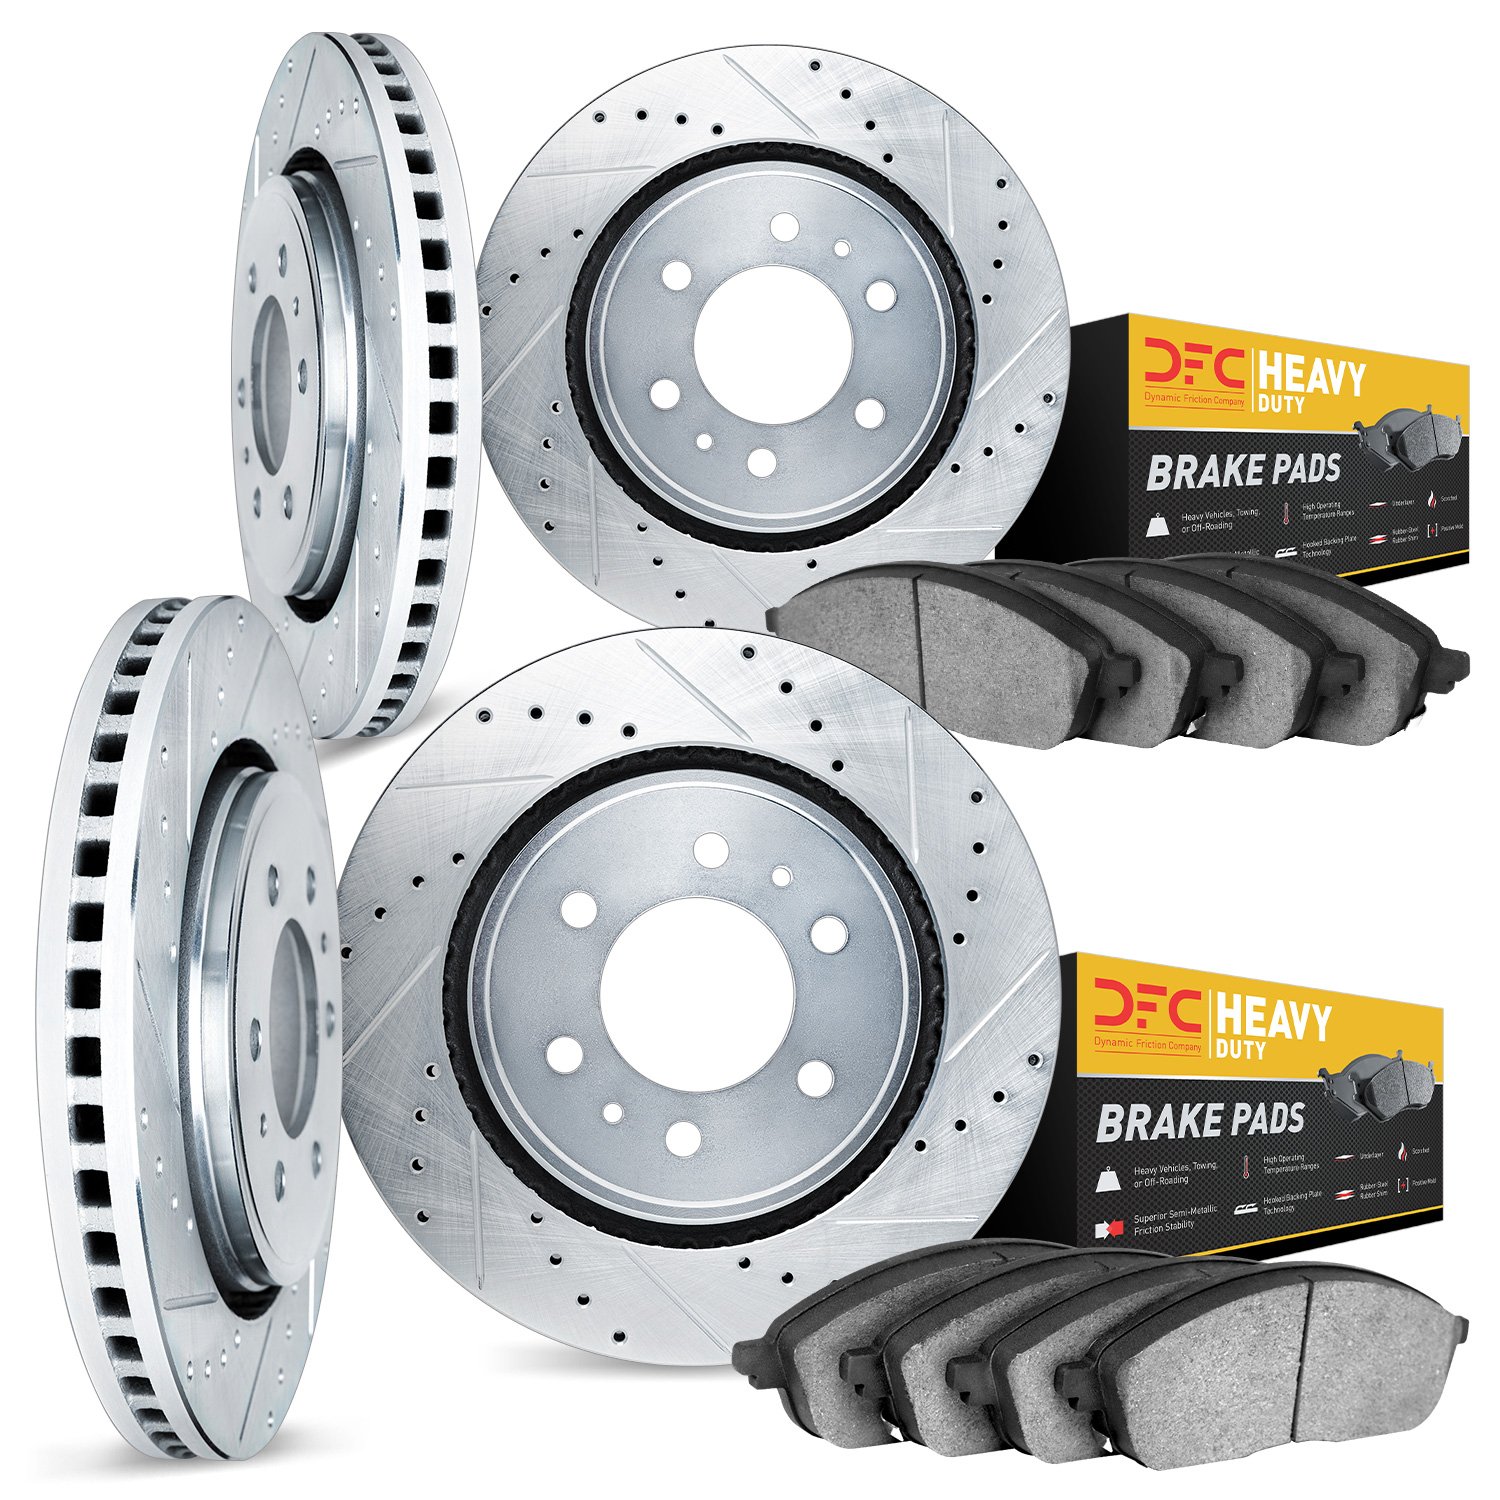 7204-99100 Drilled/Slotted Rotors w/Heavy-Duty Brake Pads Kit [Silver], 2007-2009 Ford/Lincoln/Mercury/Mazda, Position: Front an